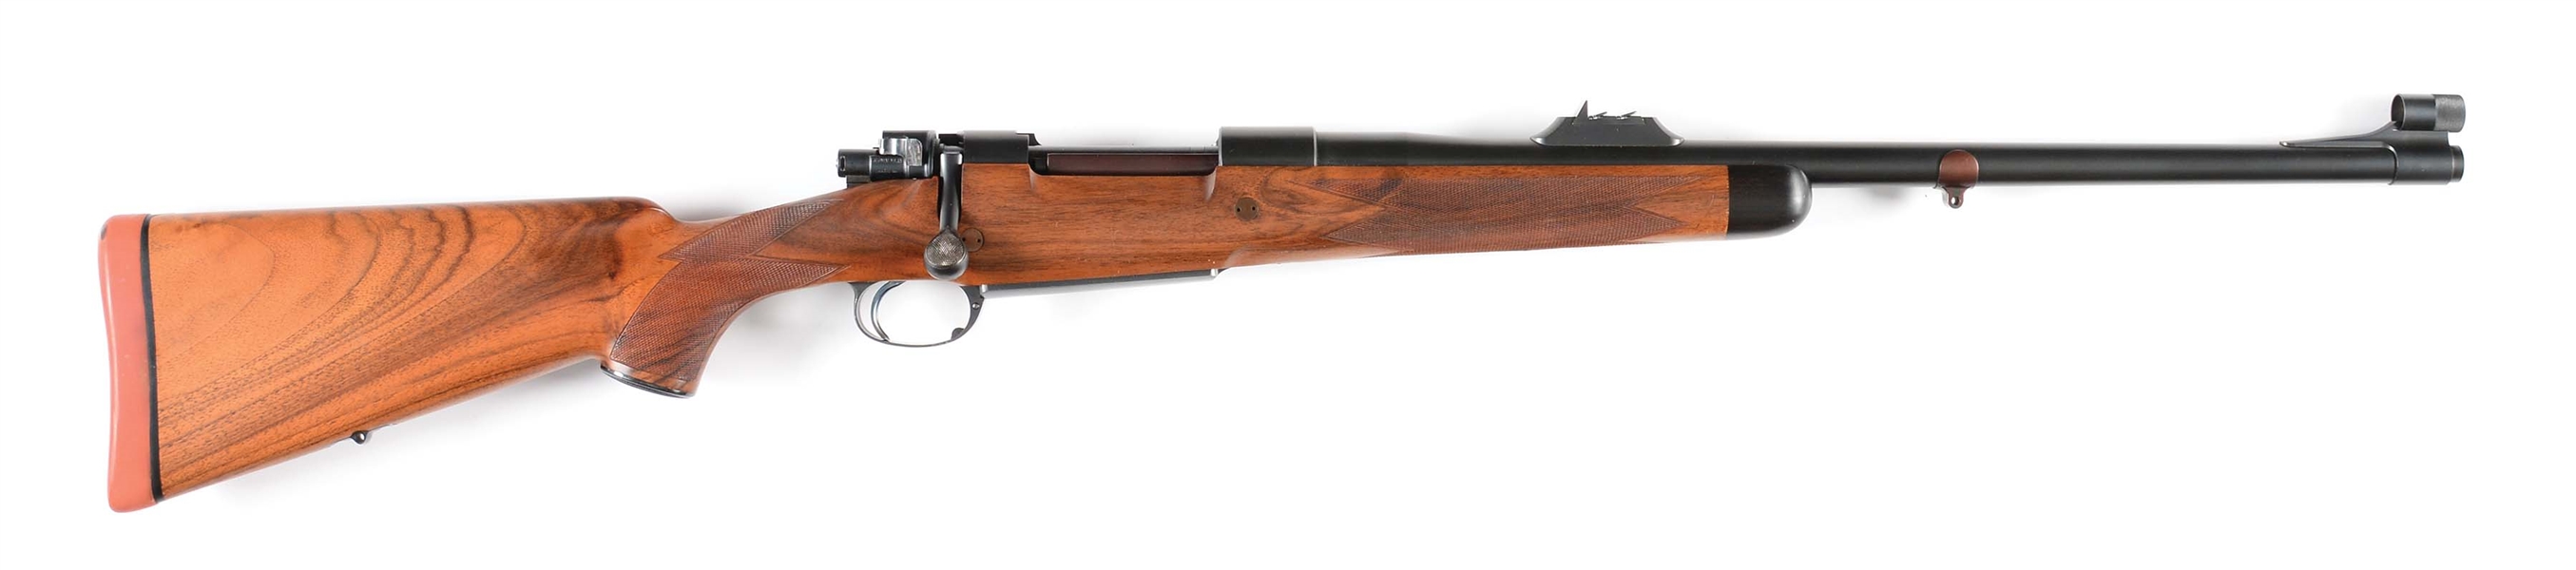 (M) MHD BOLT ACTION RIFLE IN AN UNKNOWN .416 BELTED CARTRIDGE.